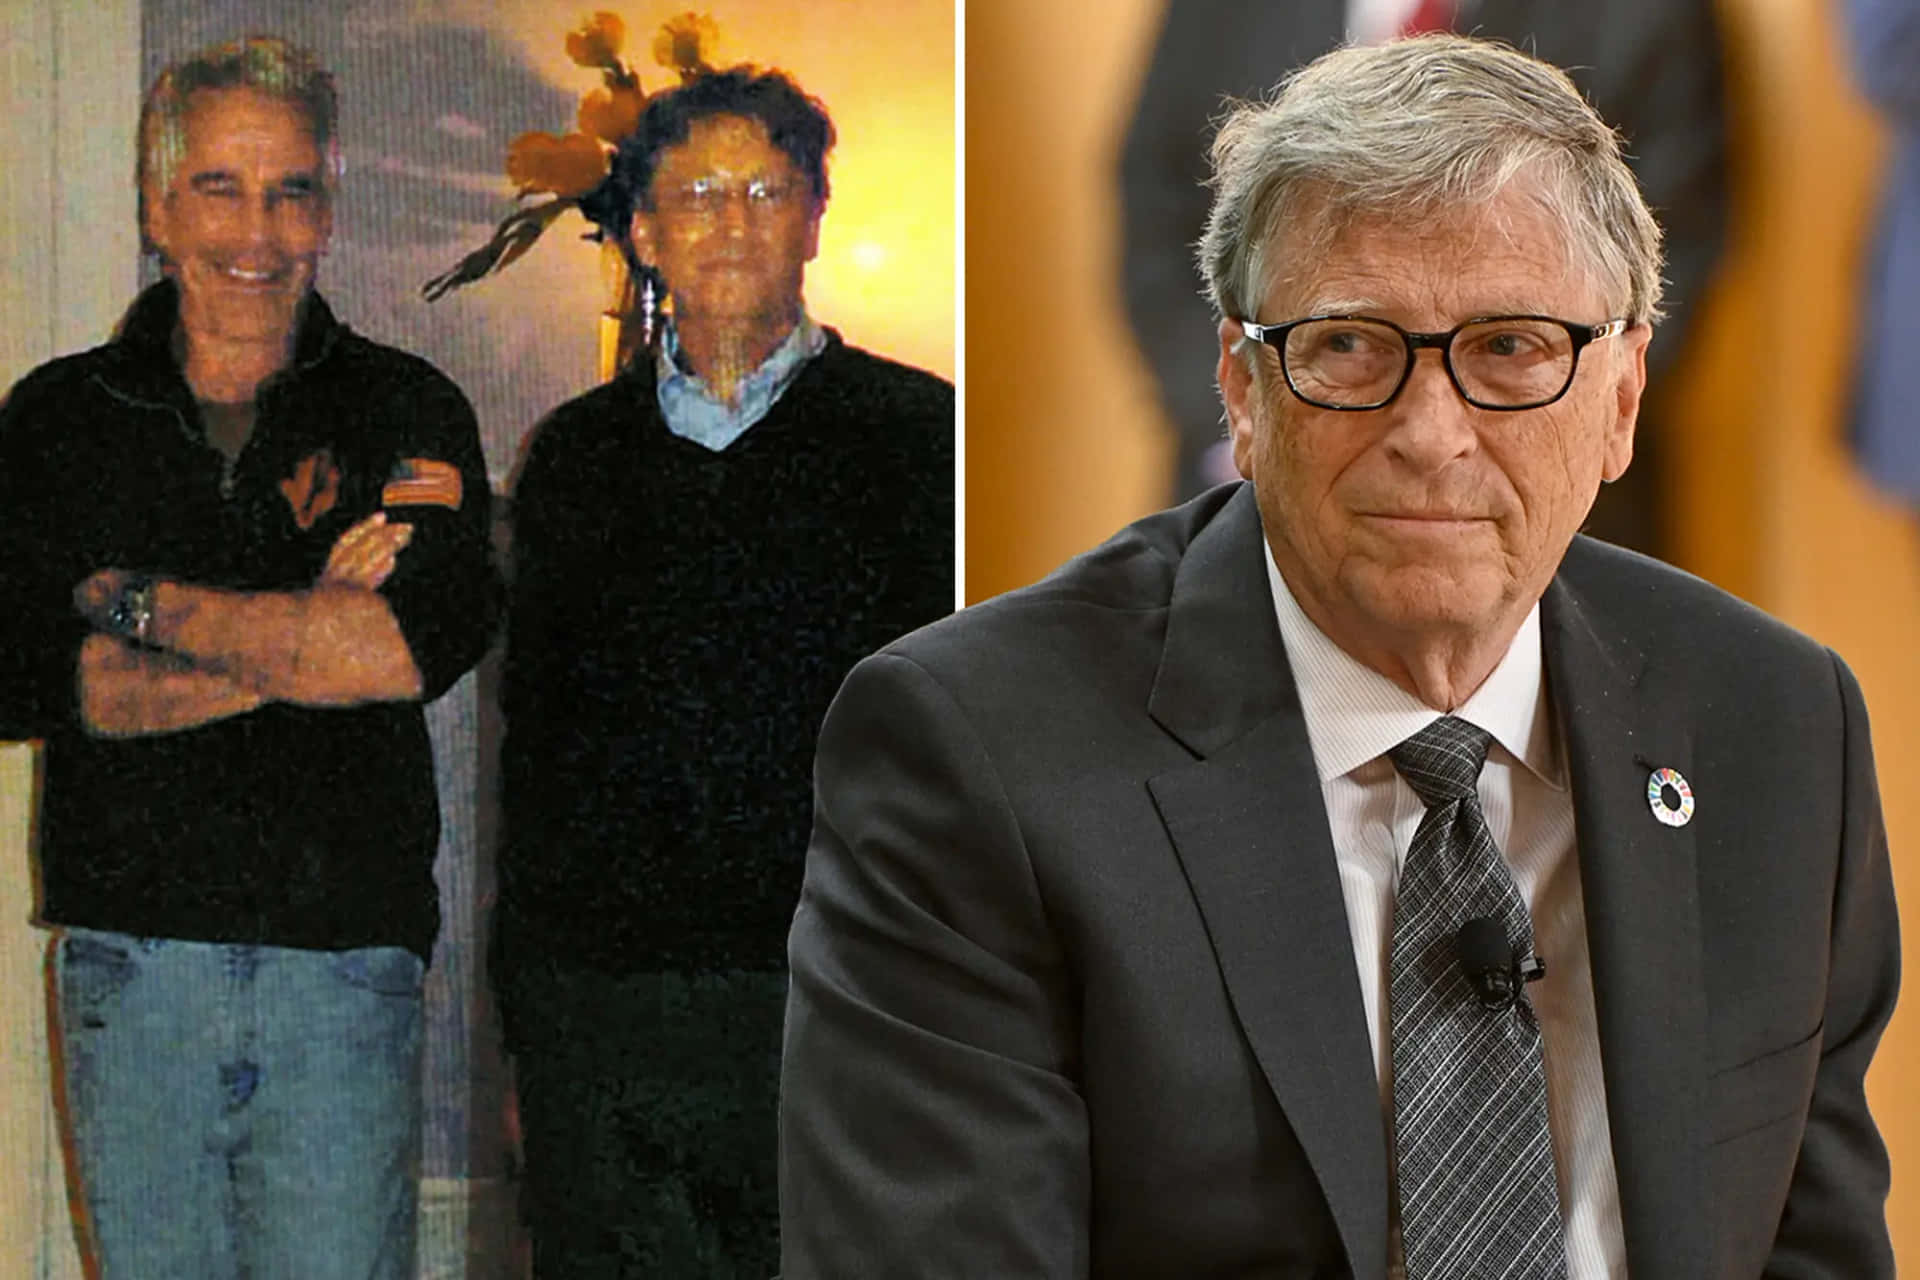 Bill Gates And A Man In A Suit